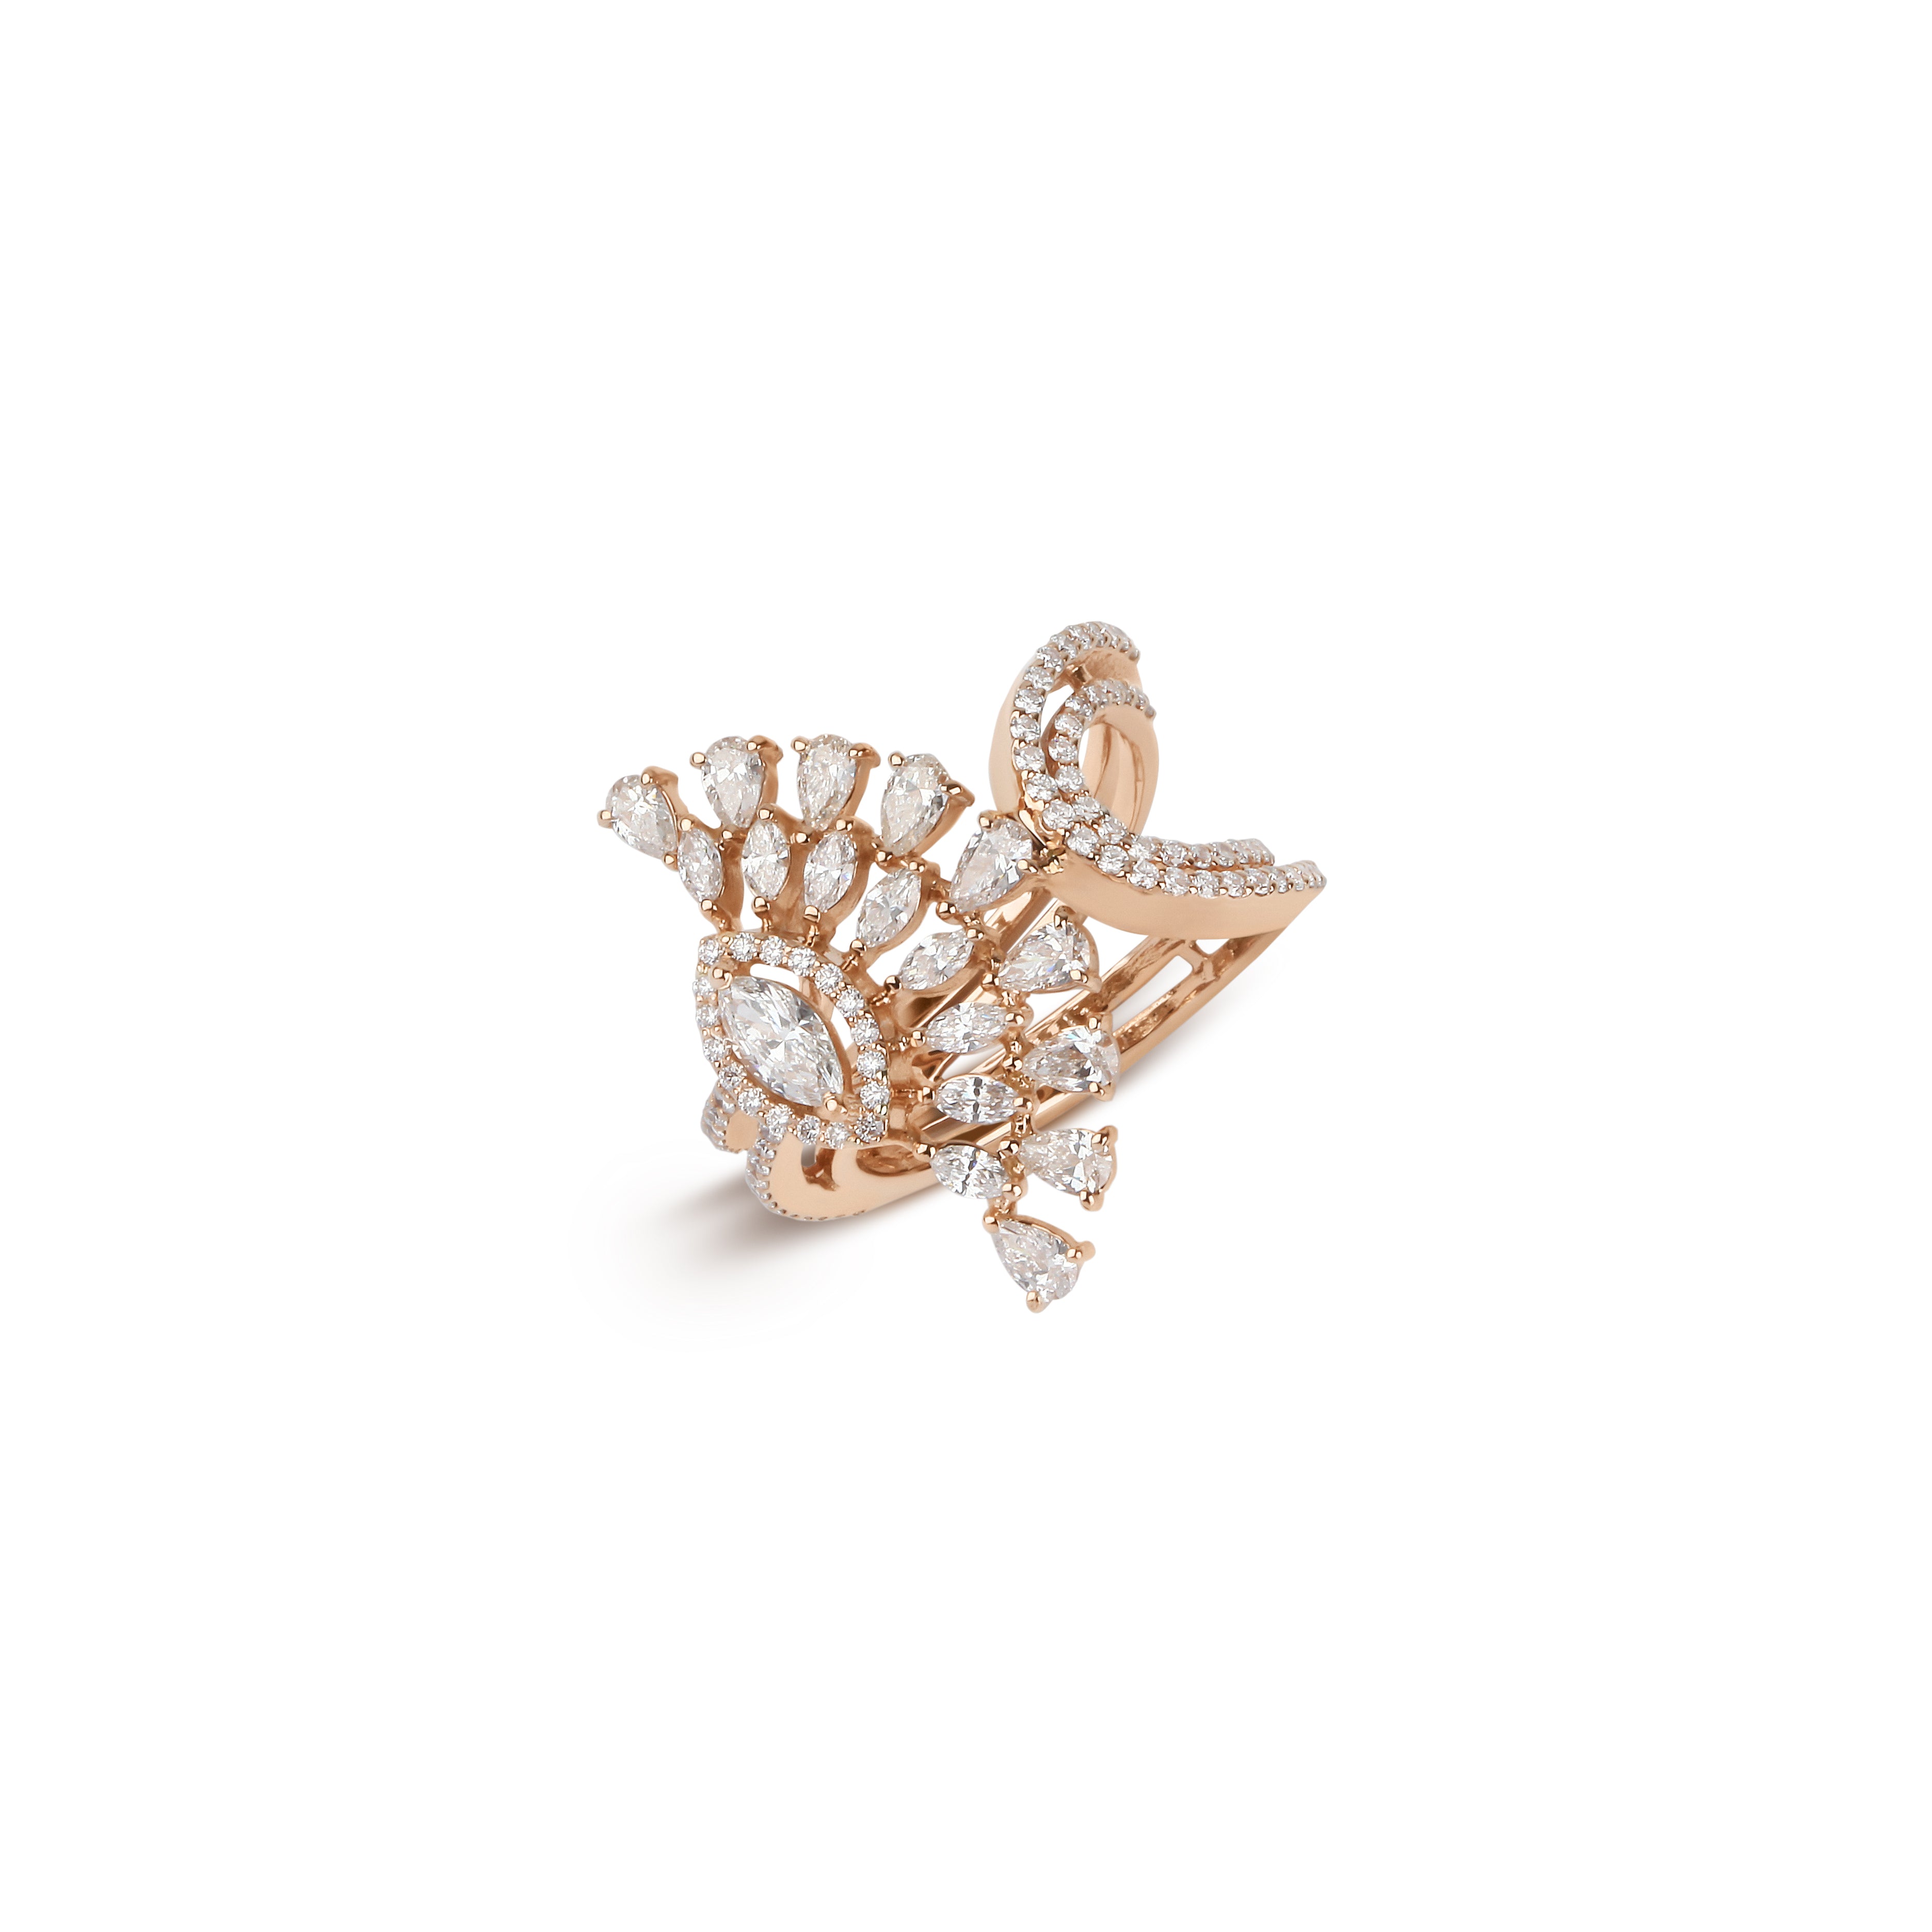 Rays of Pear Shaped Diamonds & White/Rose Gold Ring | Jewellery Design | Buy Rings Online